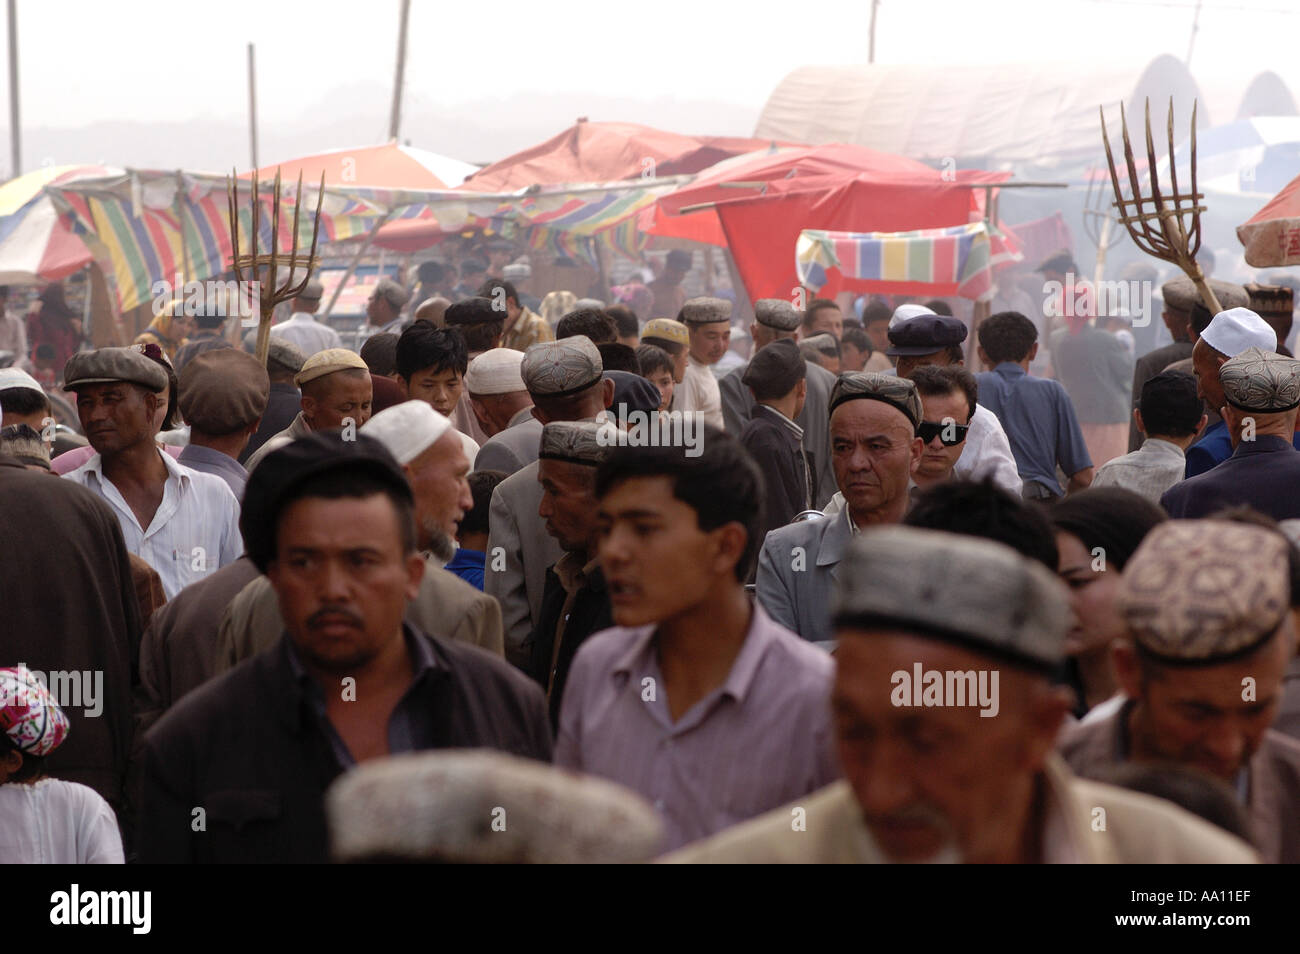 Crowds of people at the Sunday Market in Kashgar Xinjiang Province China Stock Photo